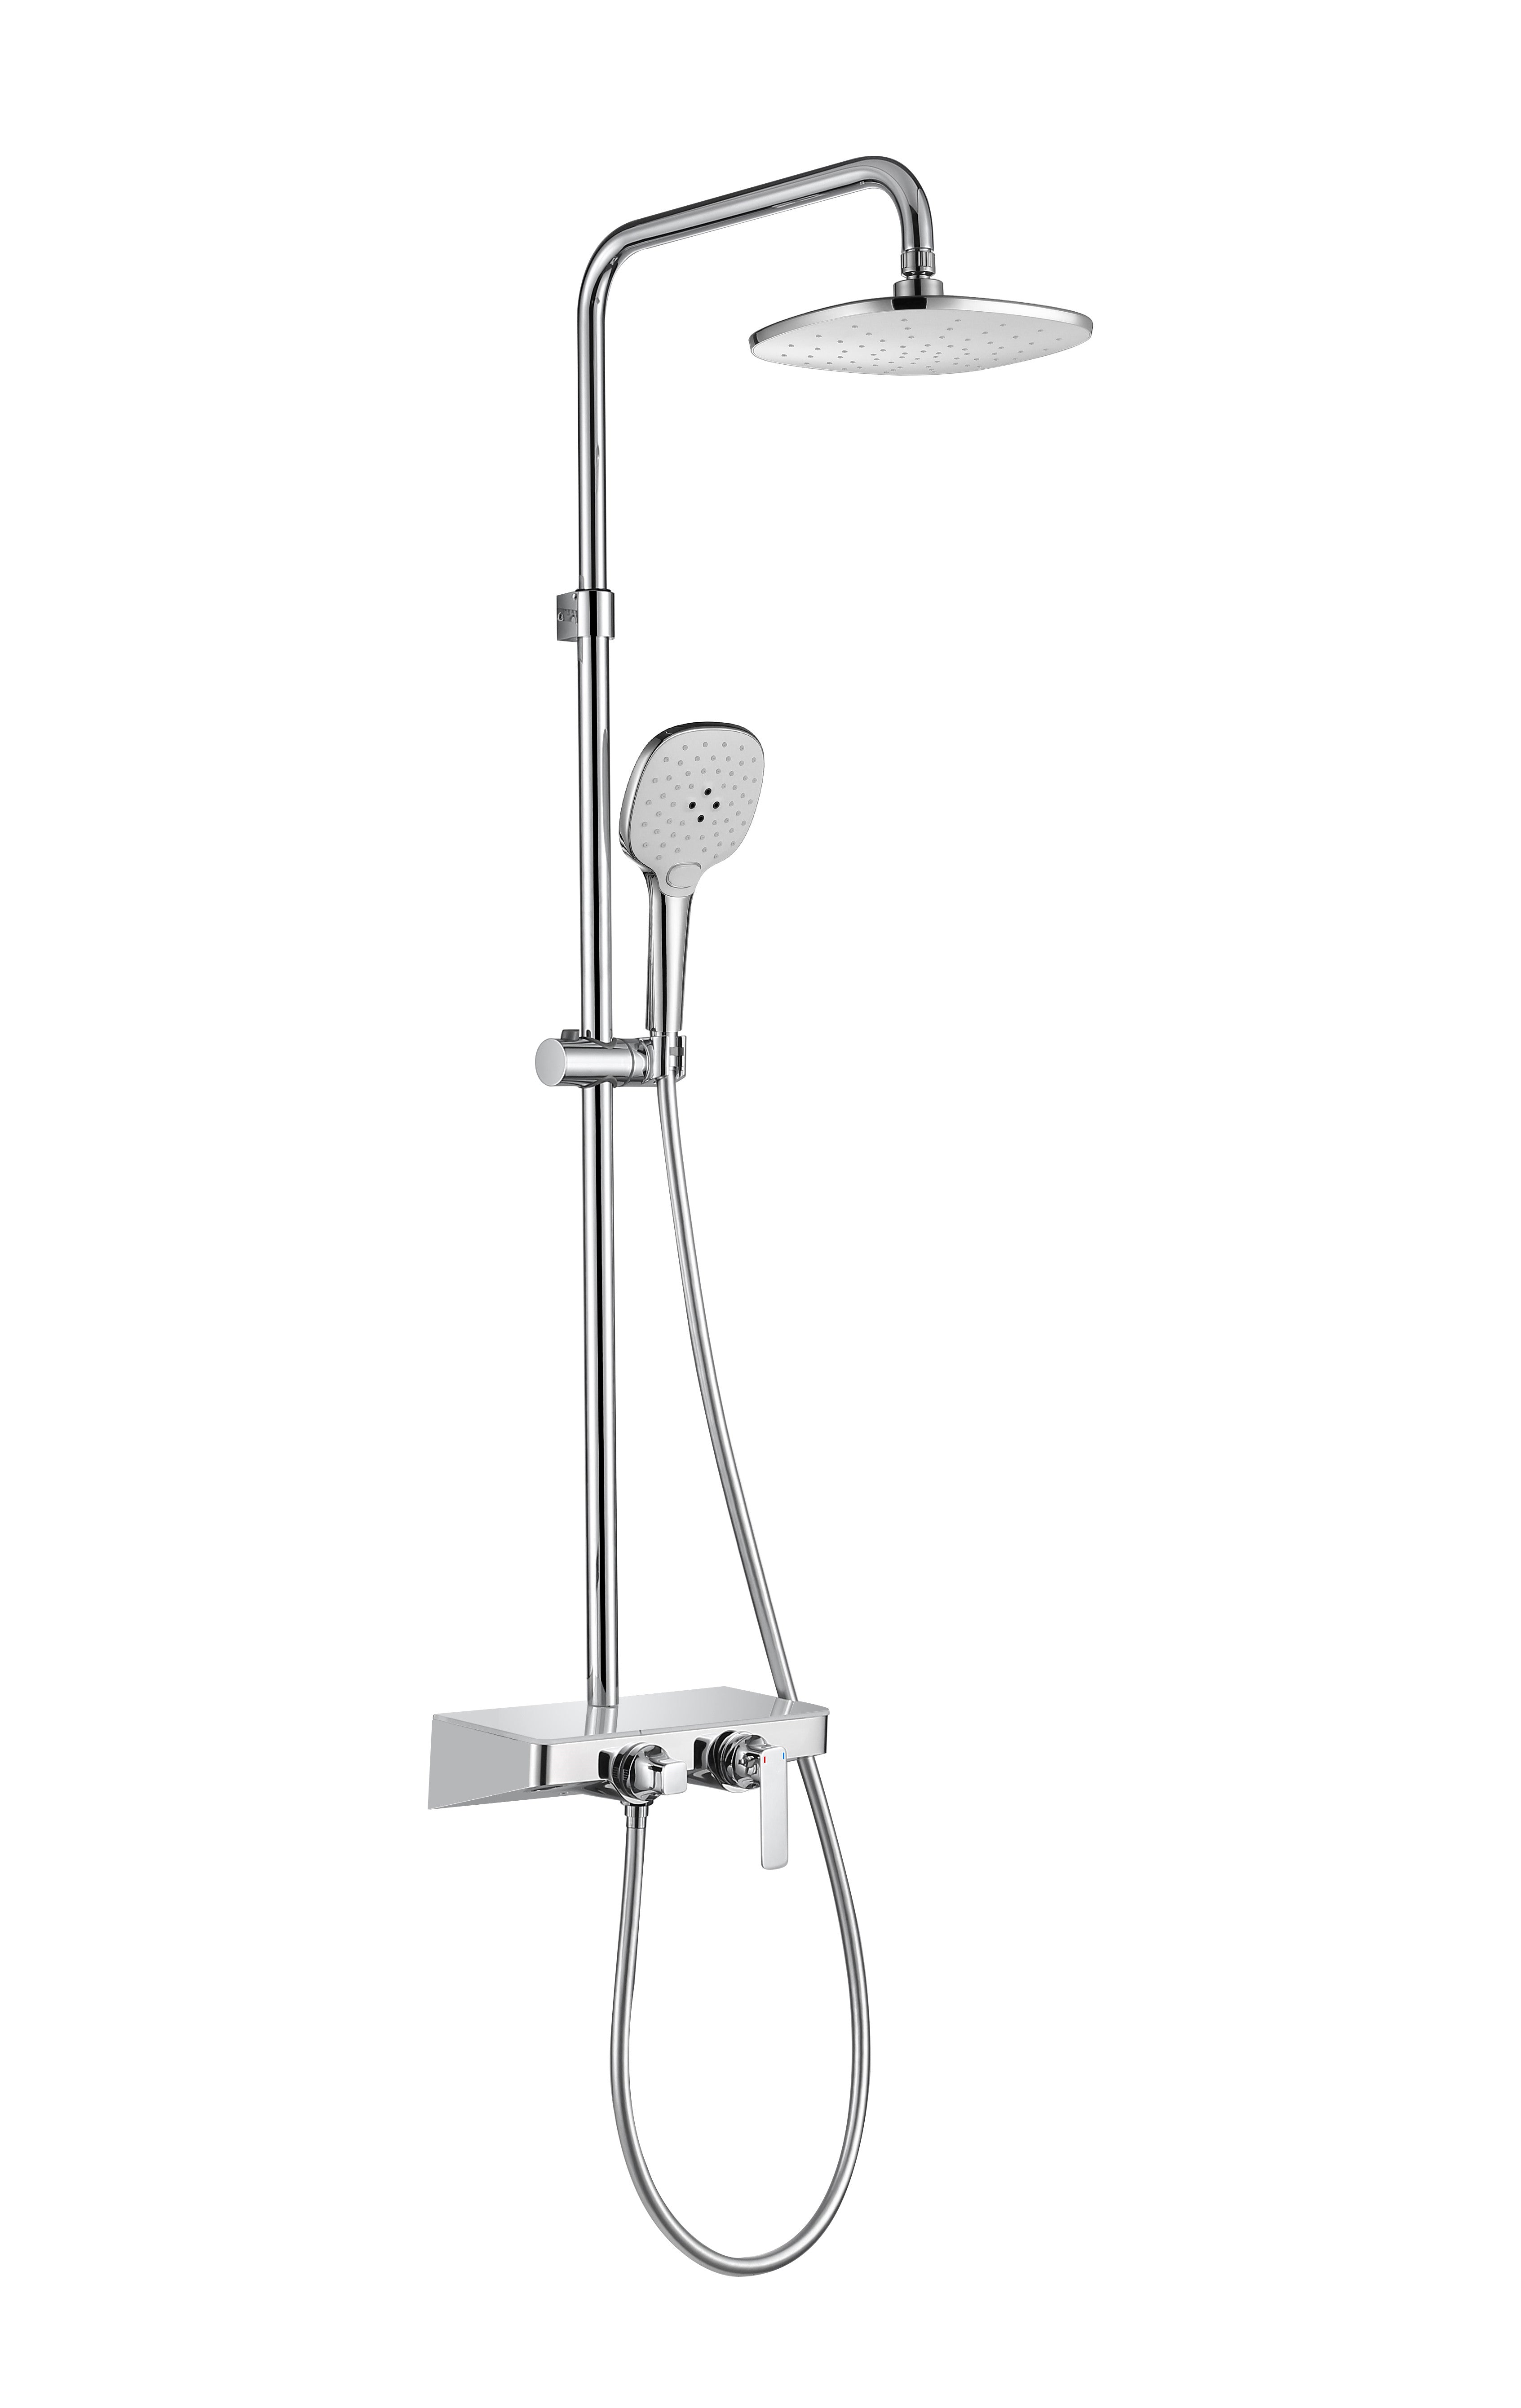 Imperial Living Shower System with Thermostatic Shower Mixer, Shower Mixer Set 9'' Rainfall Shower Head Smart Control Chrome Shower Column System